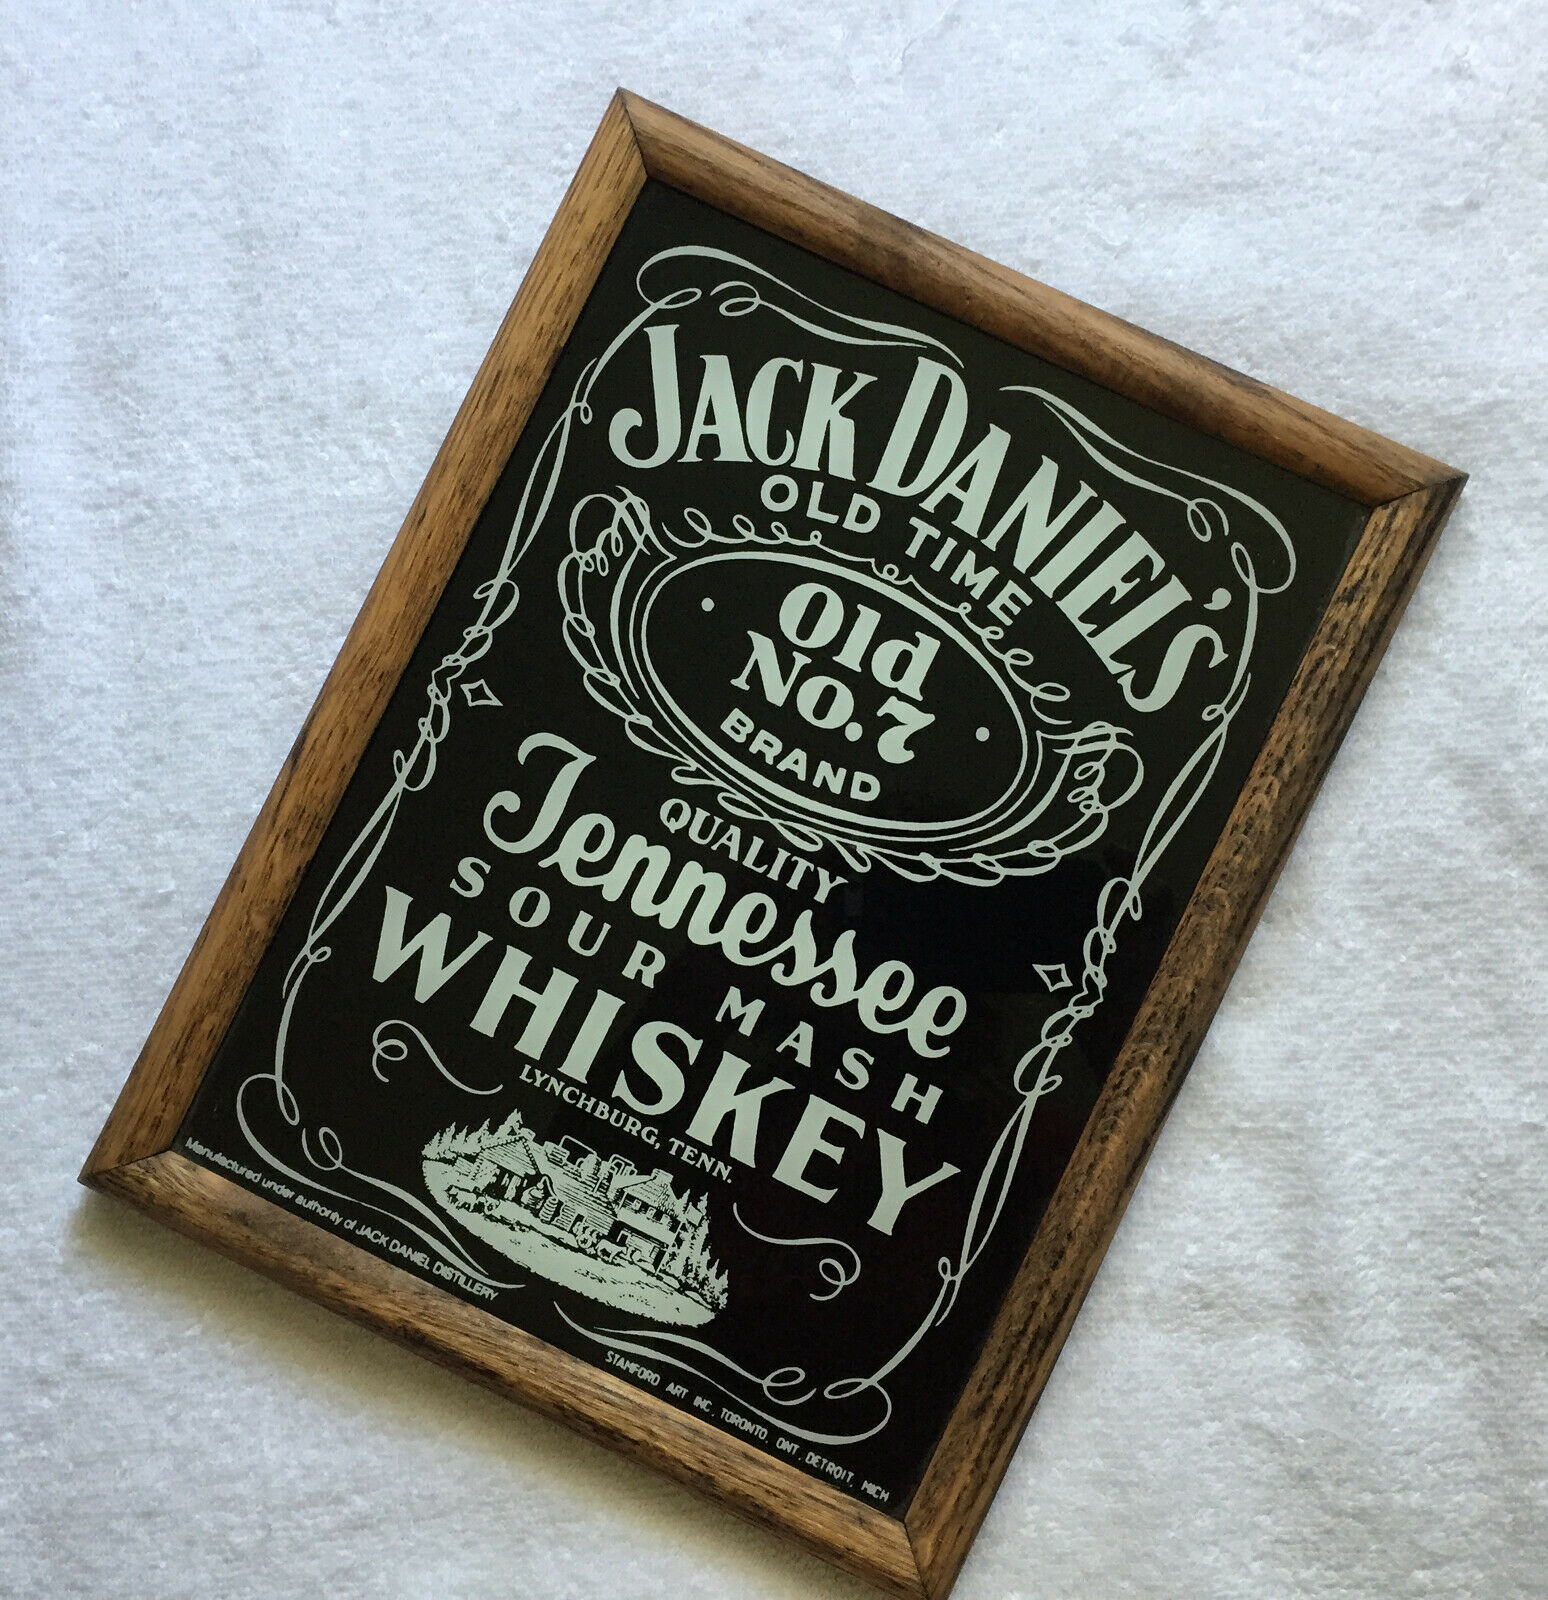 Jack Daniels Old No 7 Brand Framed Glass Sign 10" by 13" Tennessee Whiskey - $34.60